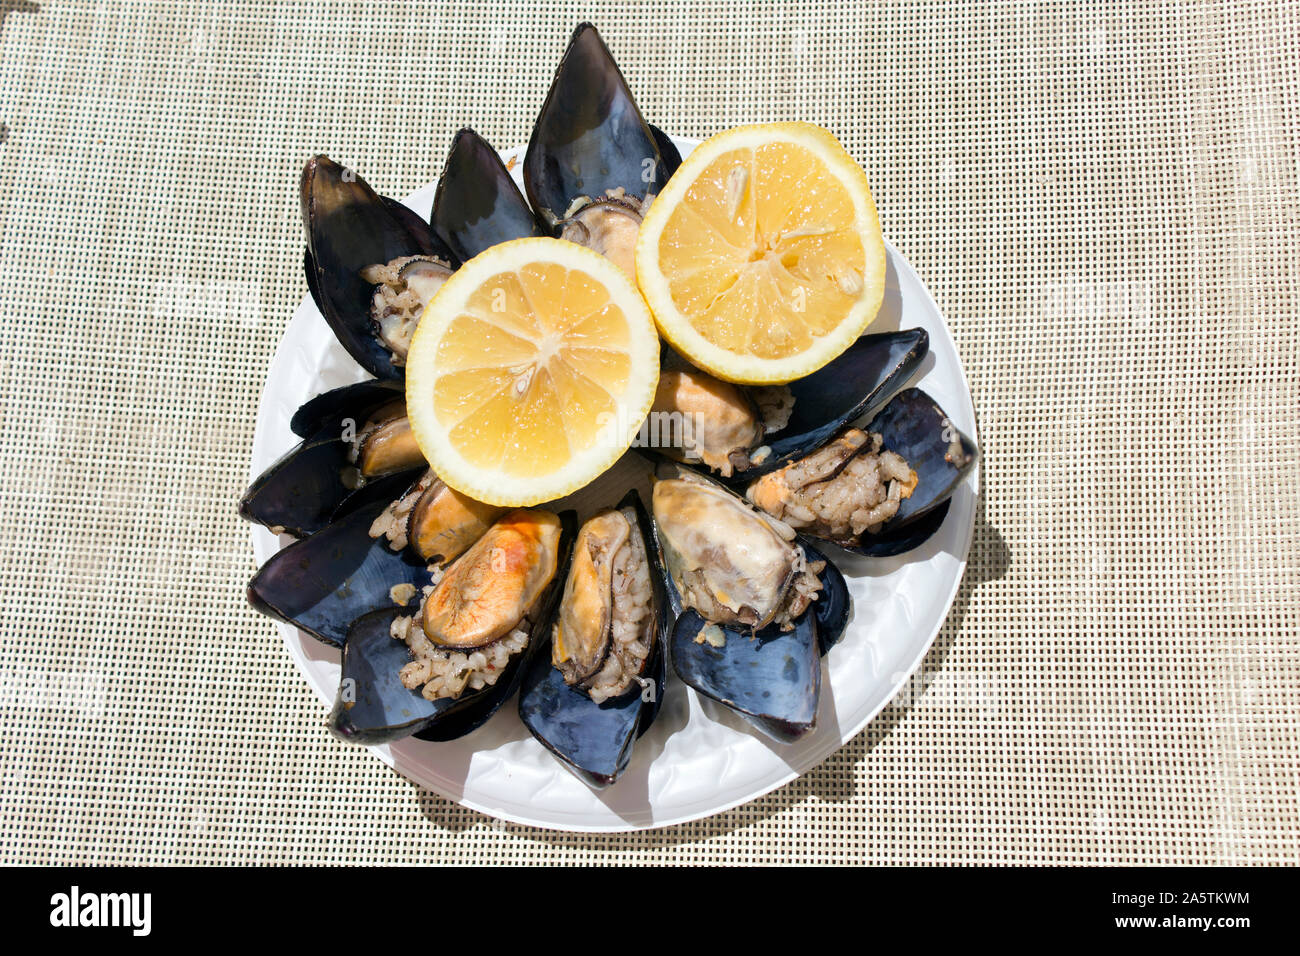 Top view of a plateful stuffed mussels accompanied by two halves of a juicy yellow lemon on a sunny day. Stock Photo